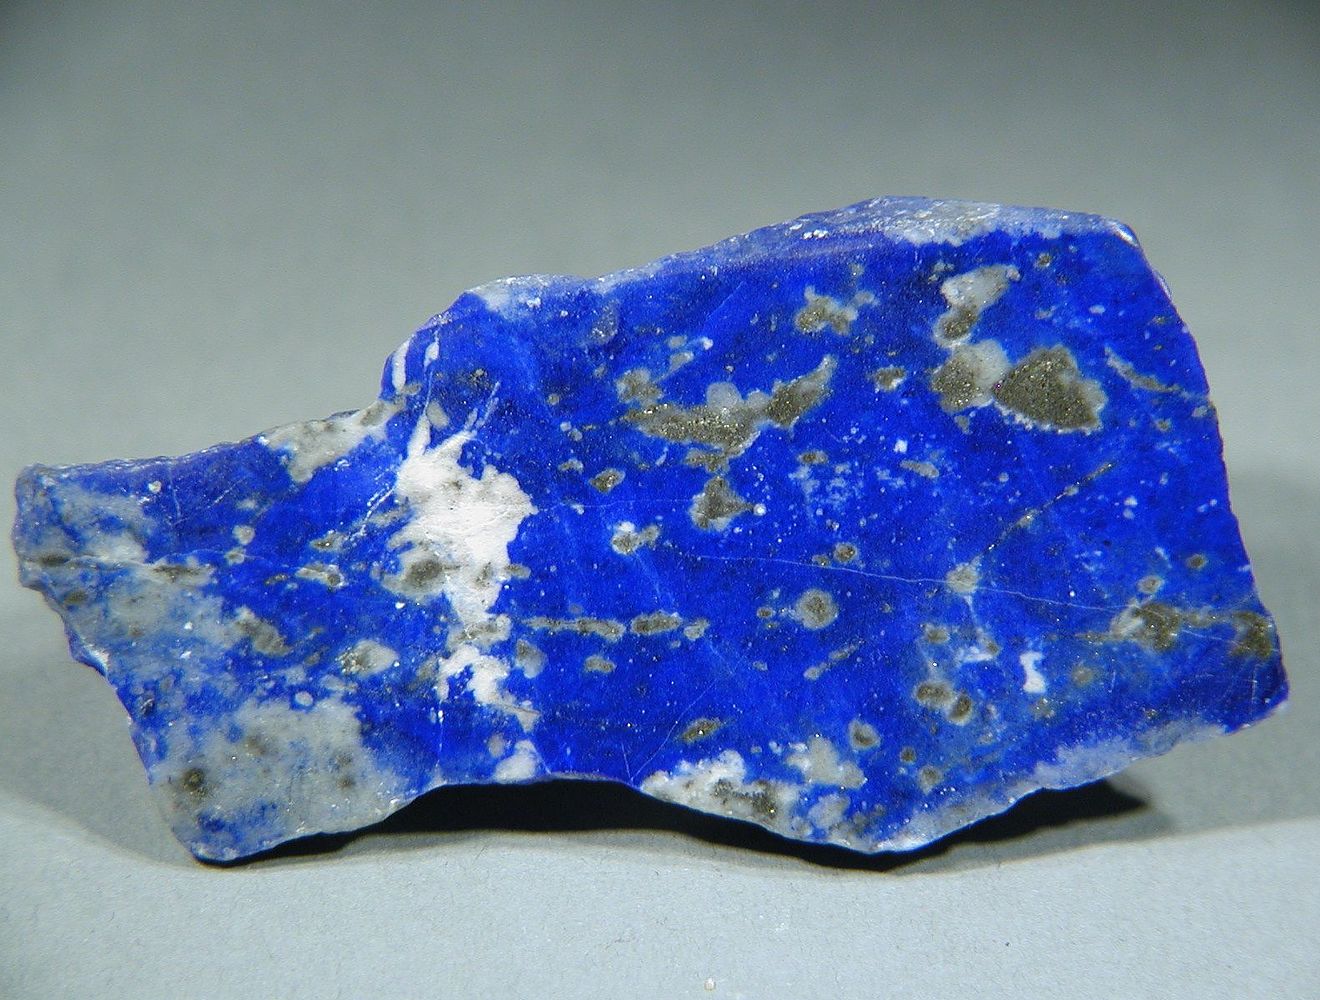 Lapis lazuli: Mineral information, data and localities.